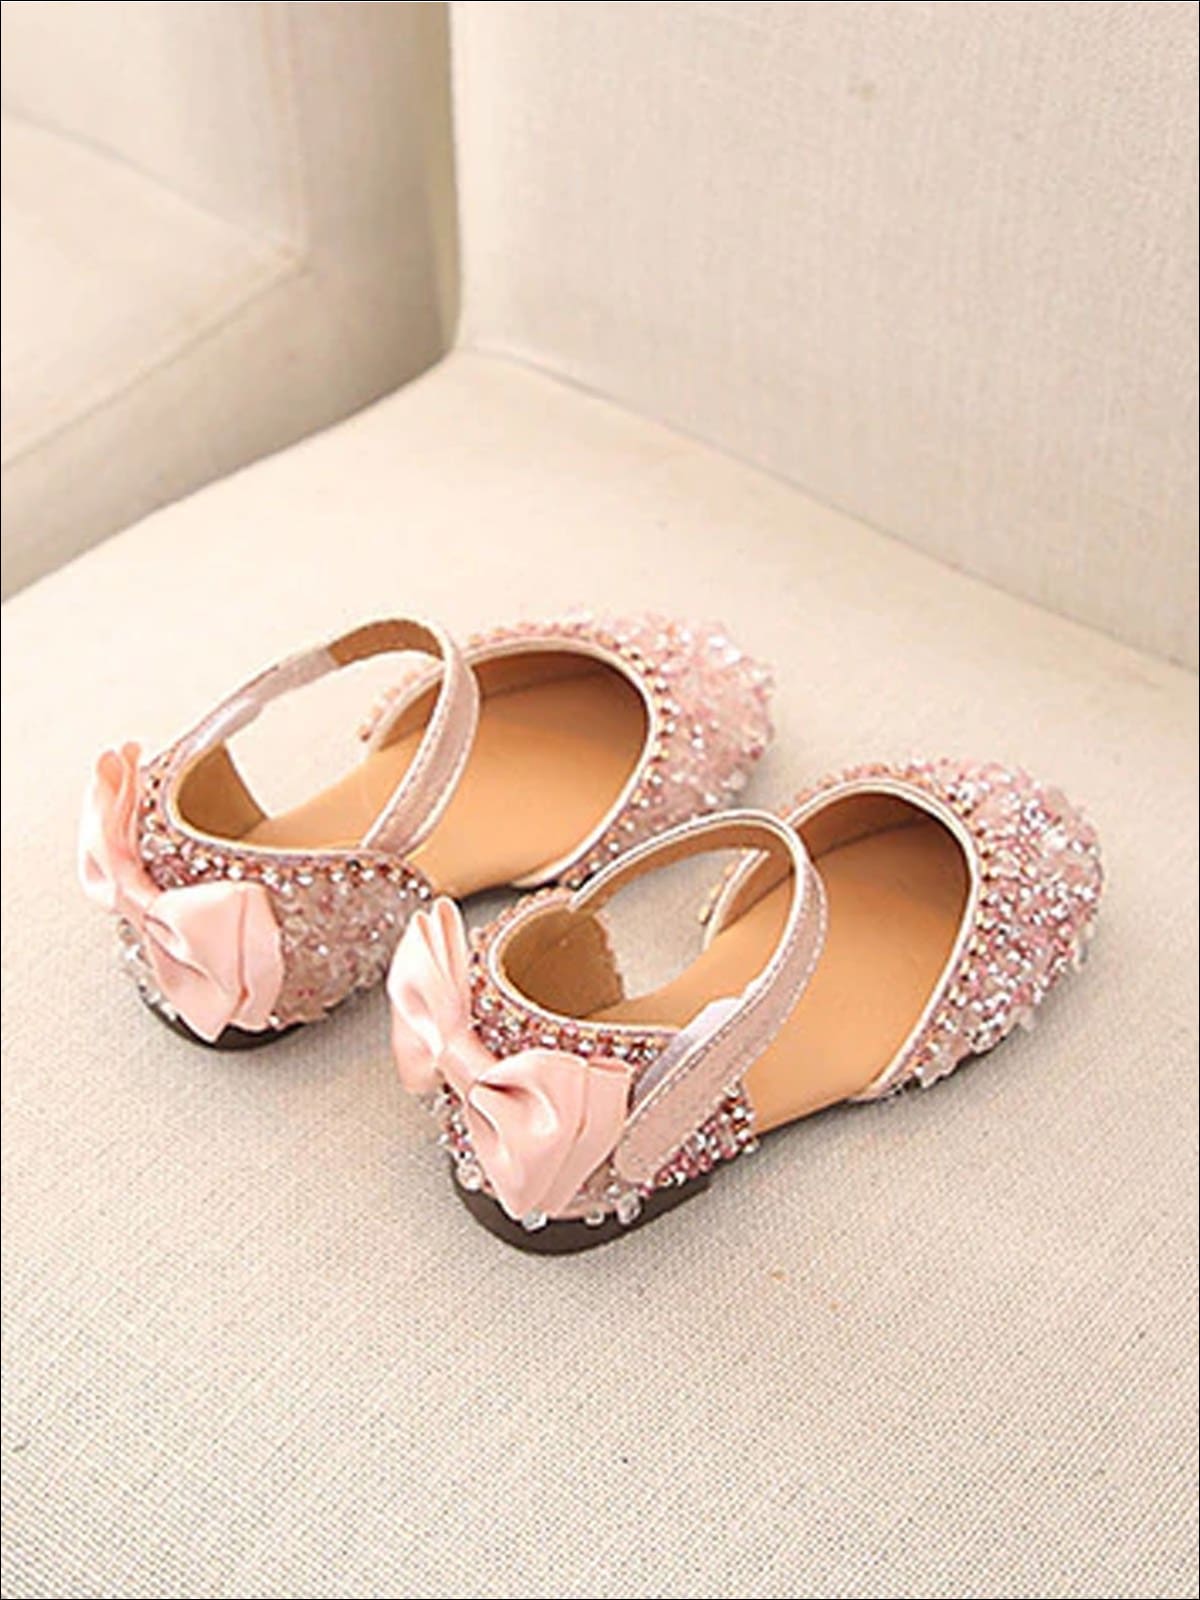 Mia Belle Girls Princess Sequined Bow Flats | Shoes By Liv and Mia